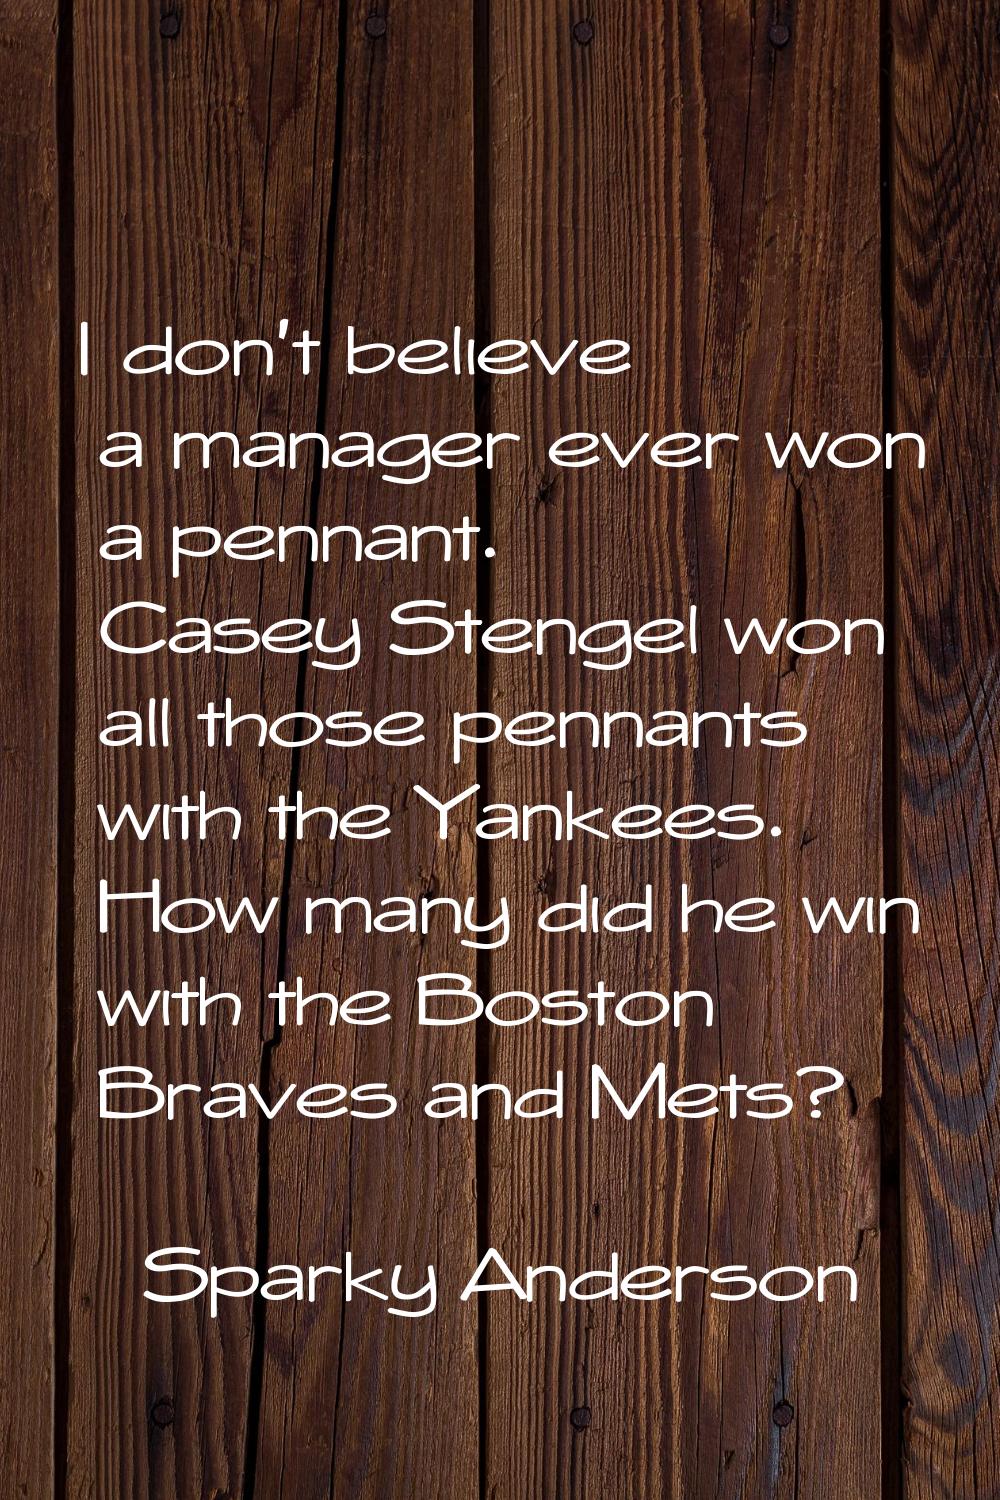 I don't believe a manager ever won a pennant. Casey Stengel won all those pennants with the Yankees